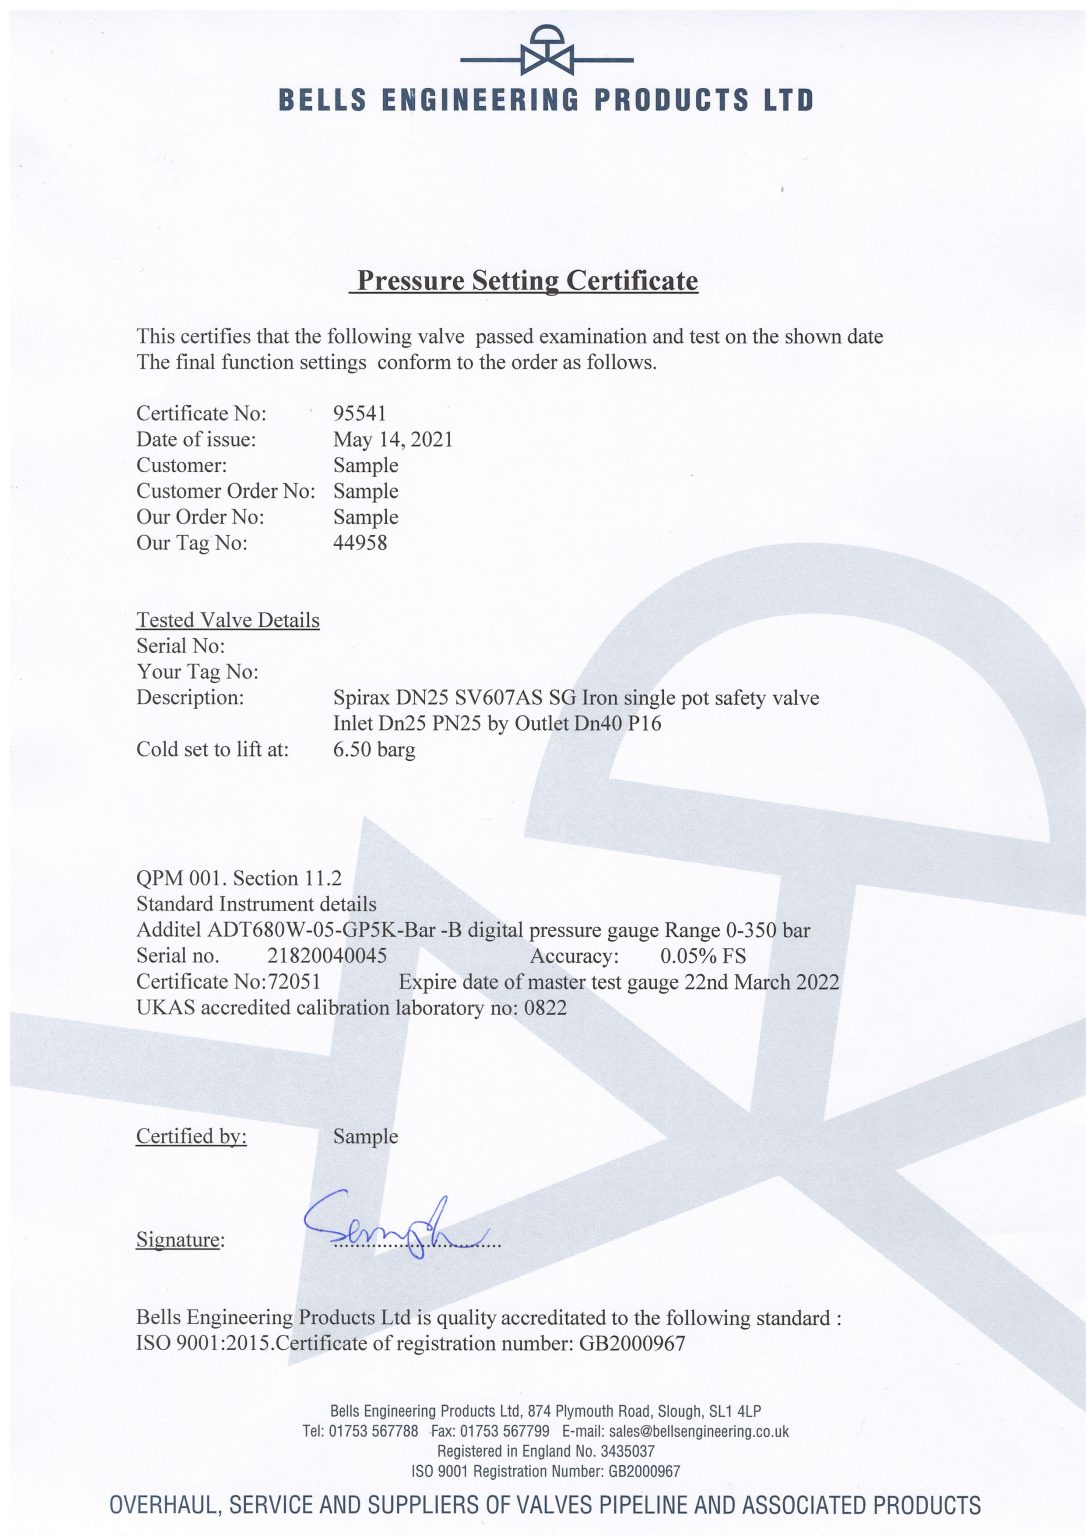 CERTIFICATES - BELLS ENGINEERING - VALVES AND GASKETS